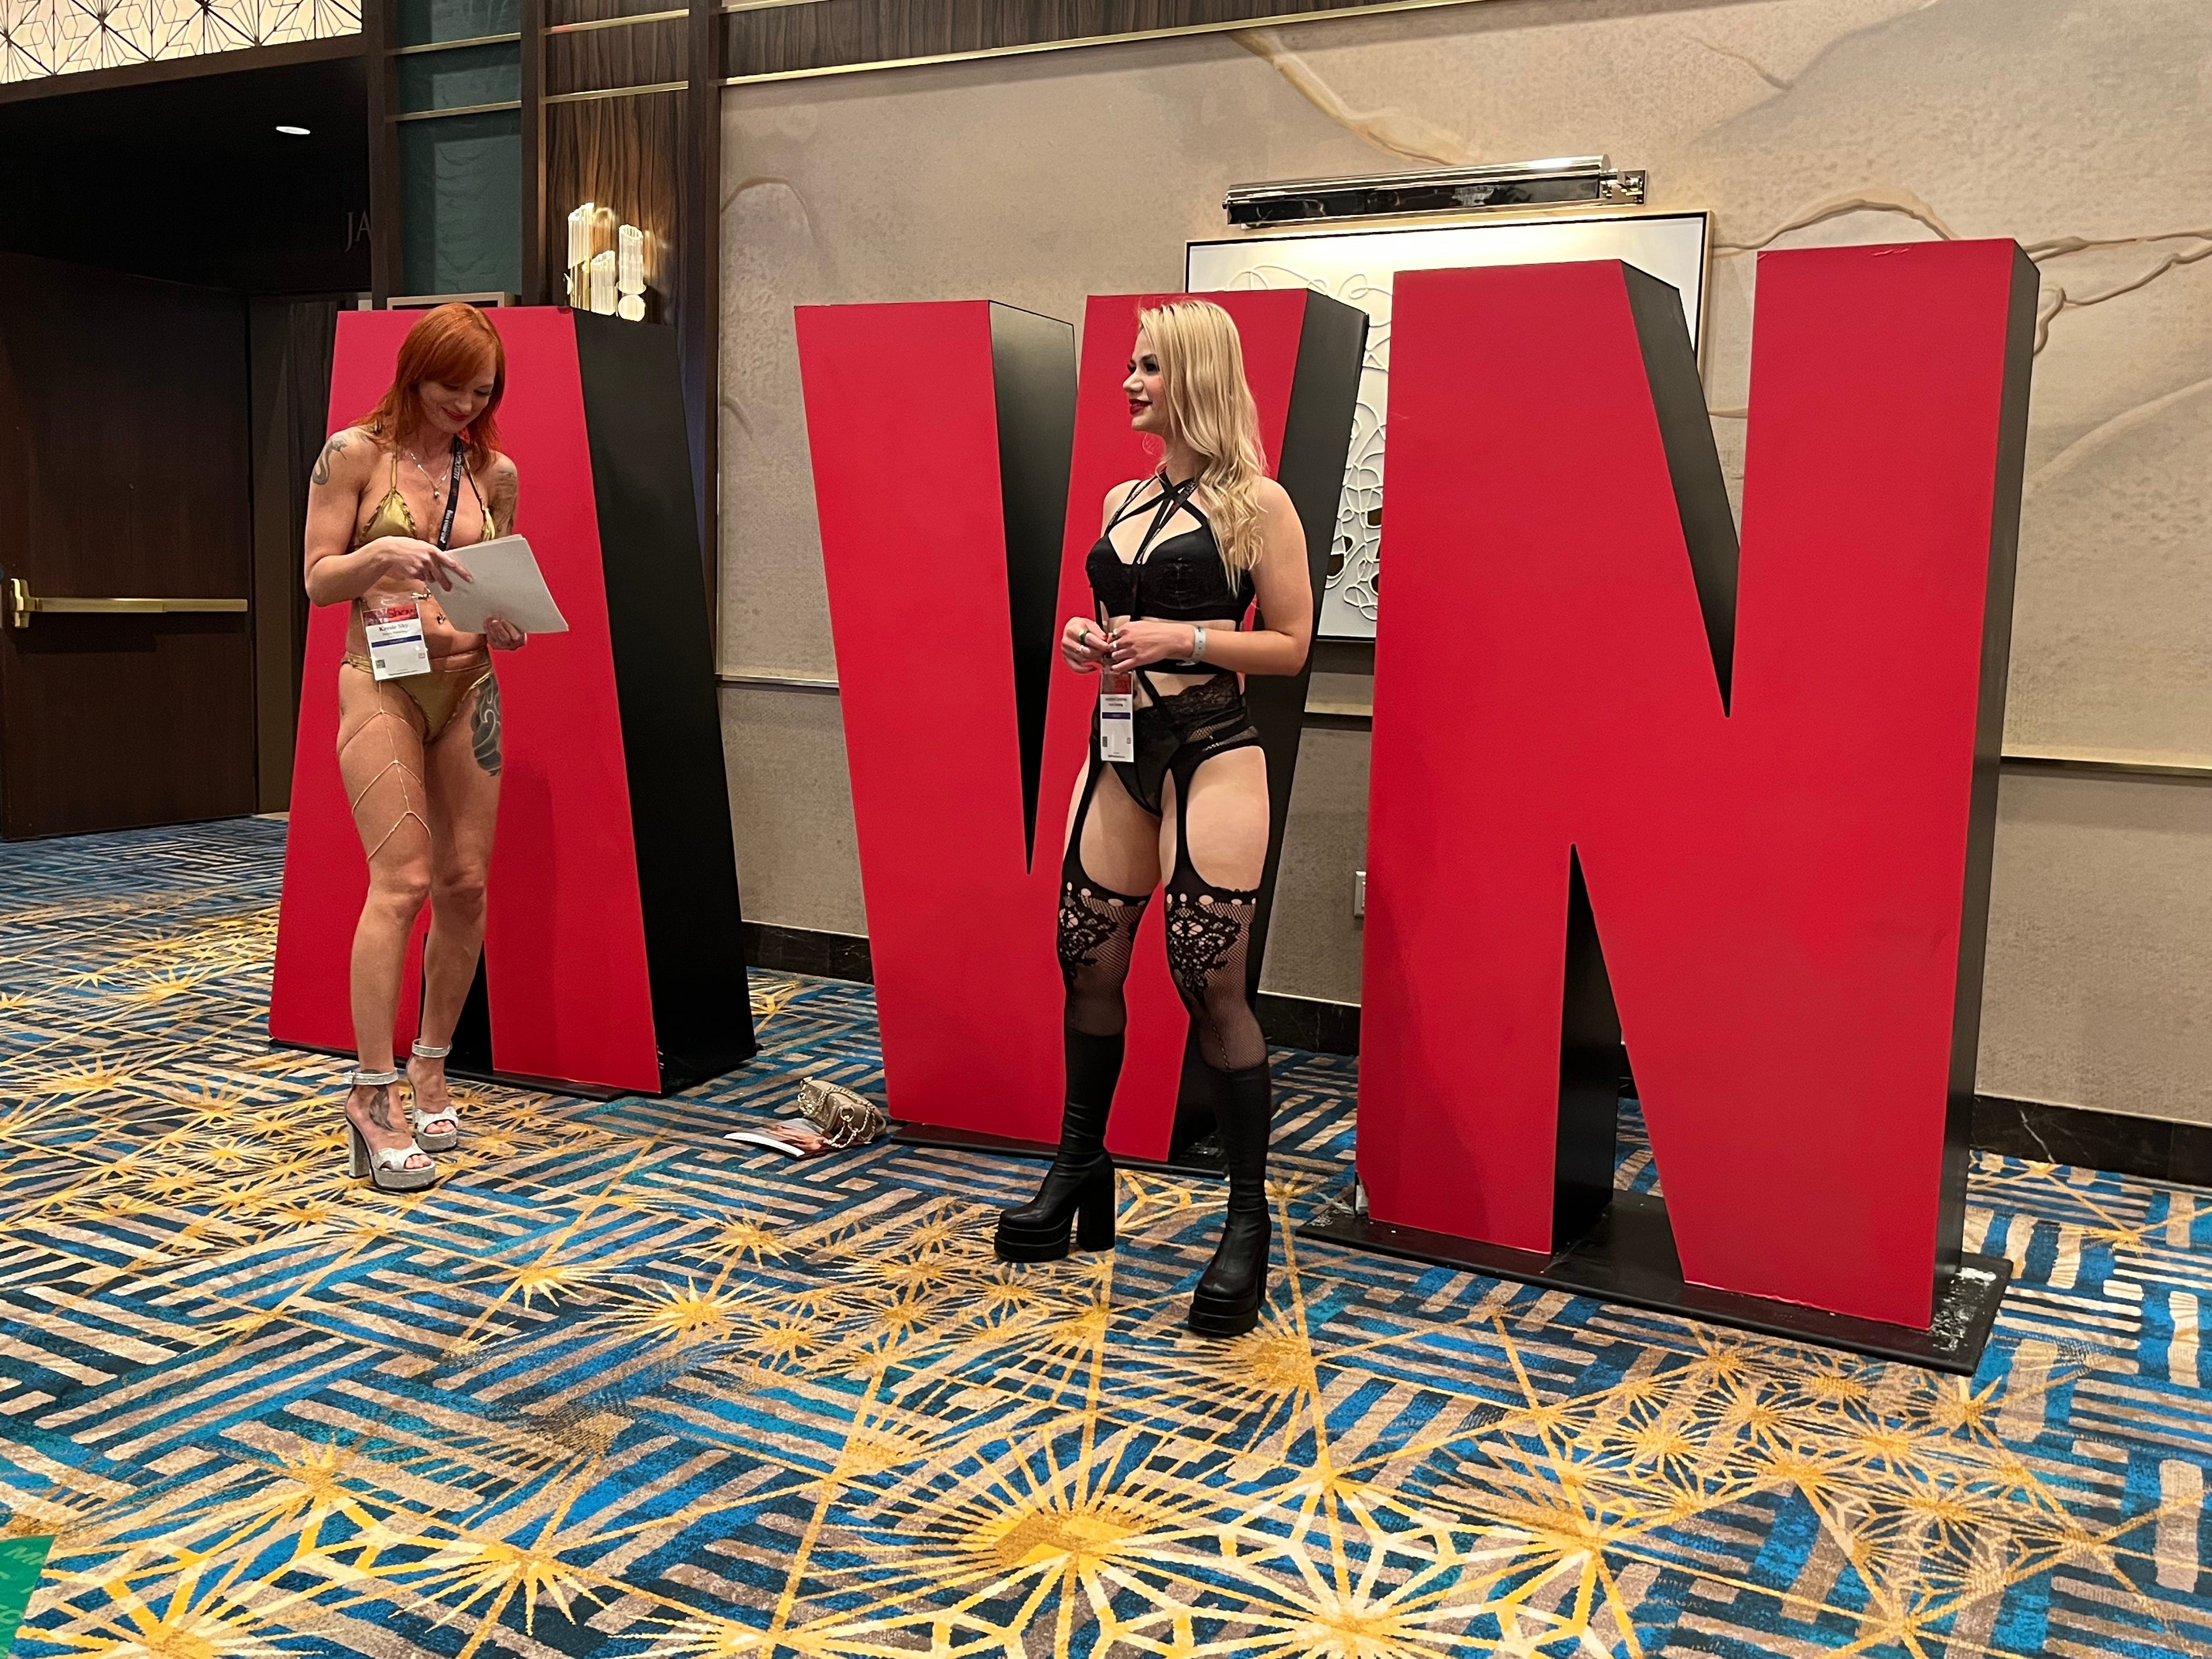 Fucked At Porn Expo - Adult entertainment convention coverage - by Michael Estrin